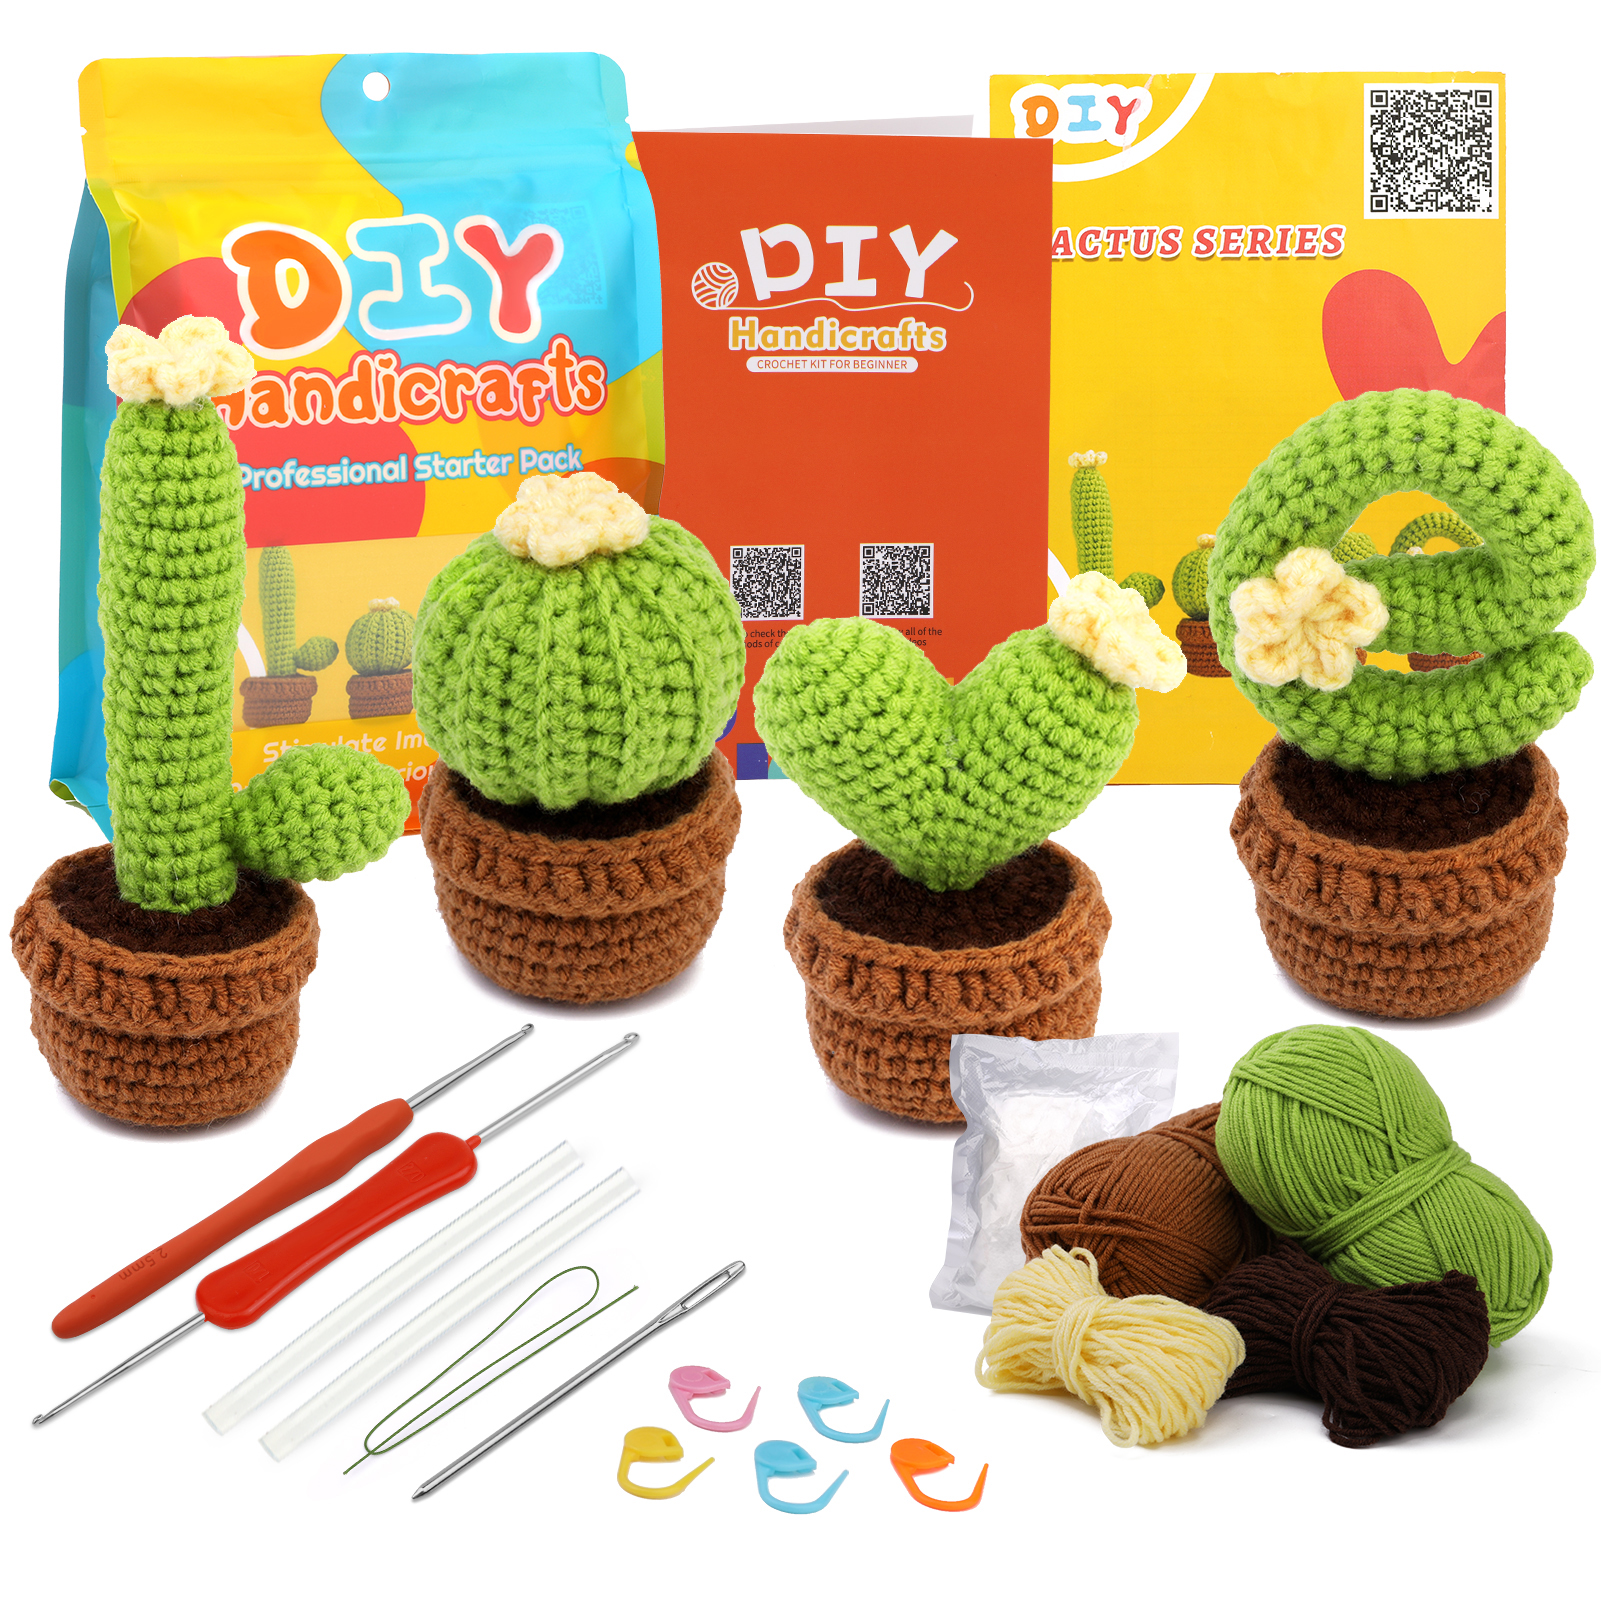 UzecPk Beginners Crochet Kit, 4 Pack Cactus Crochet Kit for Beginers and  Experts, All in One Crochet Knitting Kit with Step-by-Step Instructions  Video and Yarn(Light Green) 